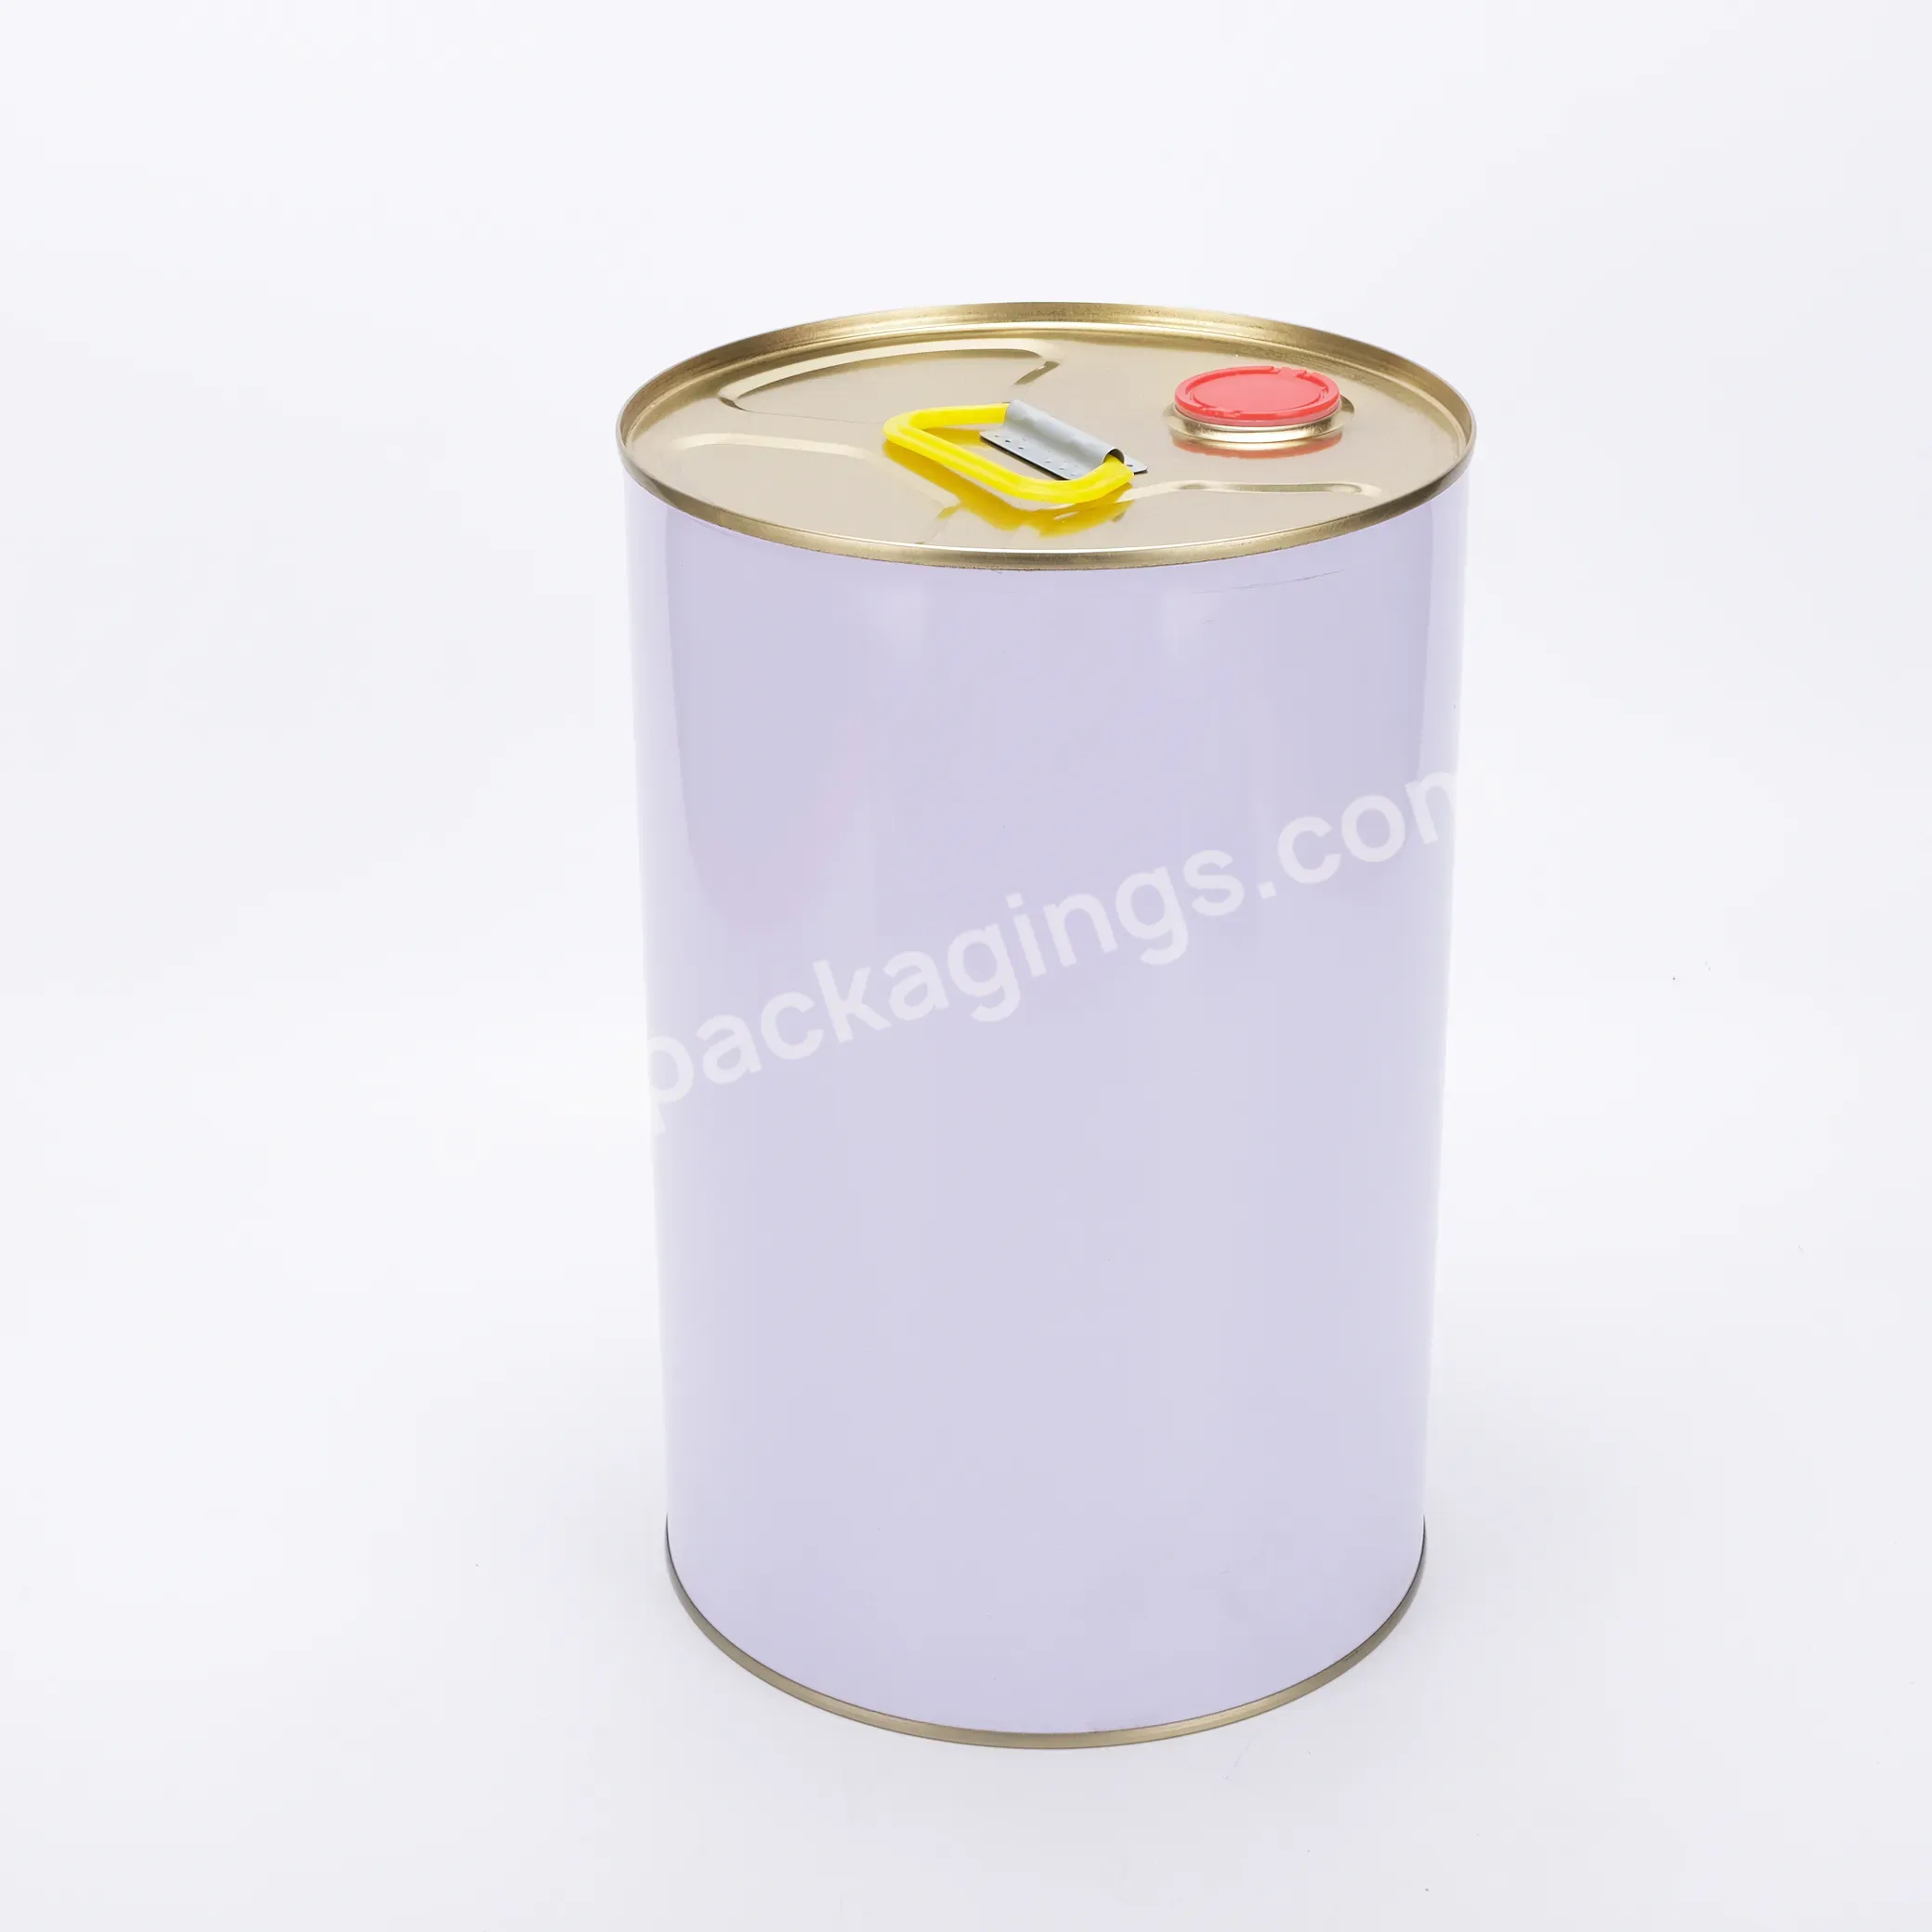 Metal Paint Bucket Custom Empty Chemical Round Unapproved Metal Paint Bucket With Lock Ring For Paint Coating - Buy Metal Bucket Beer,Gold Metal Buckets,Tiny Metal Buckets.